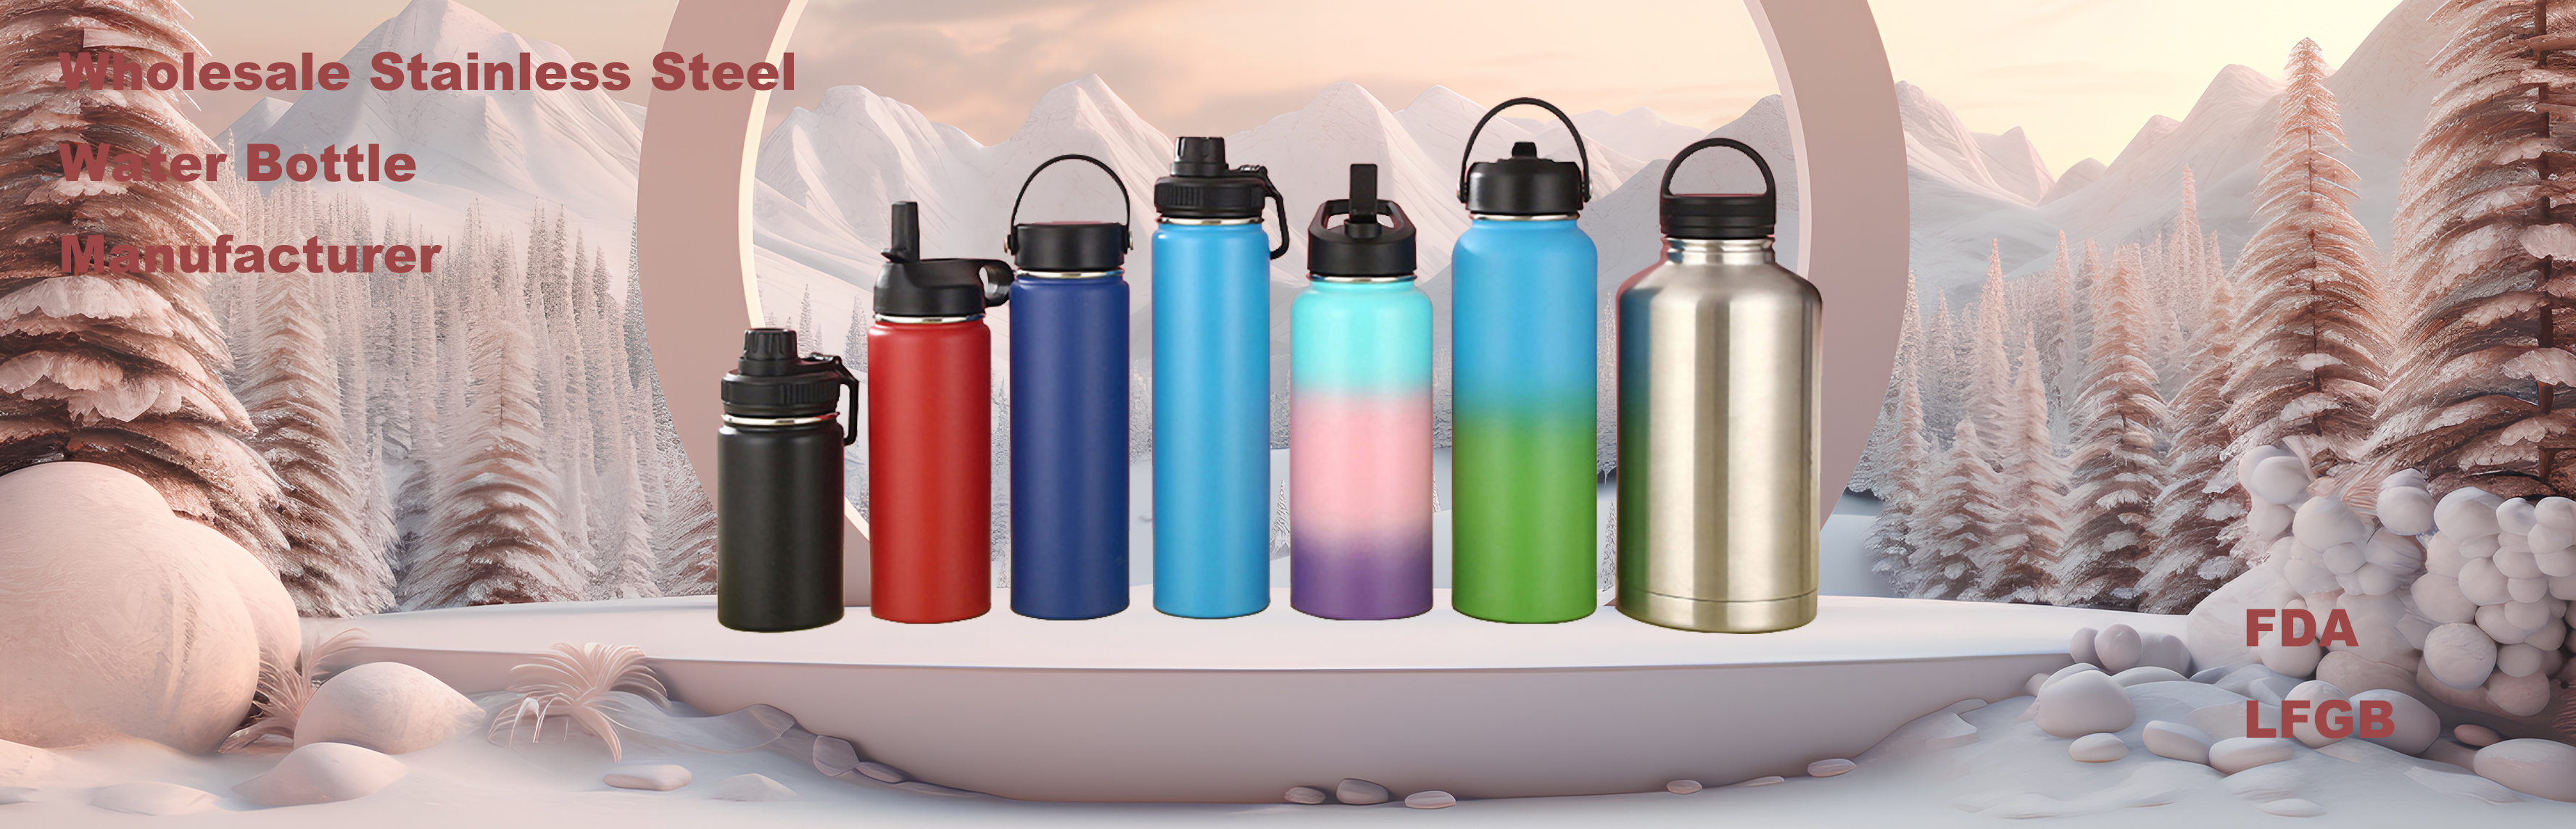 stainless steel water bottle manufacturer